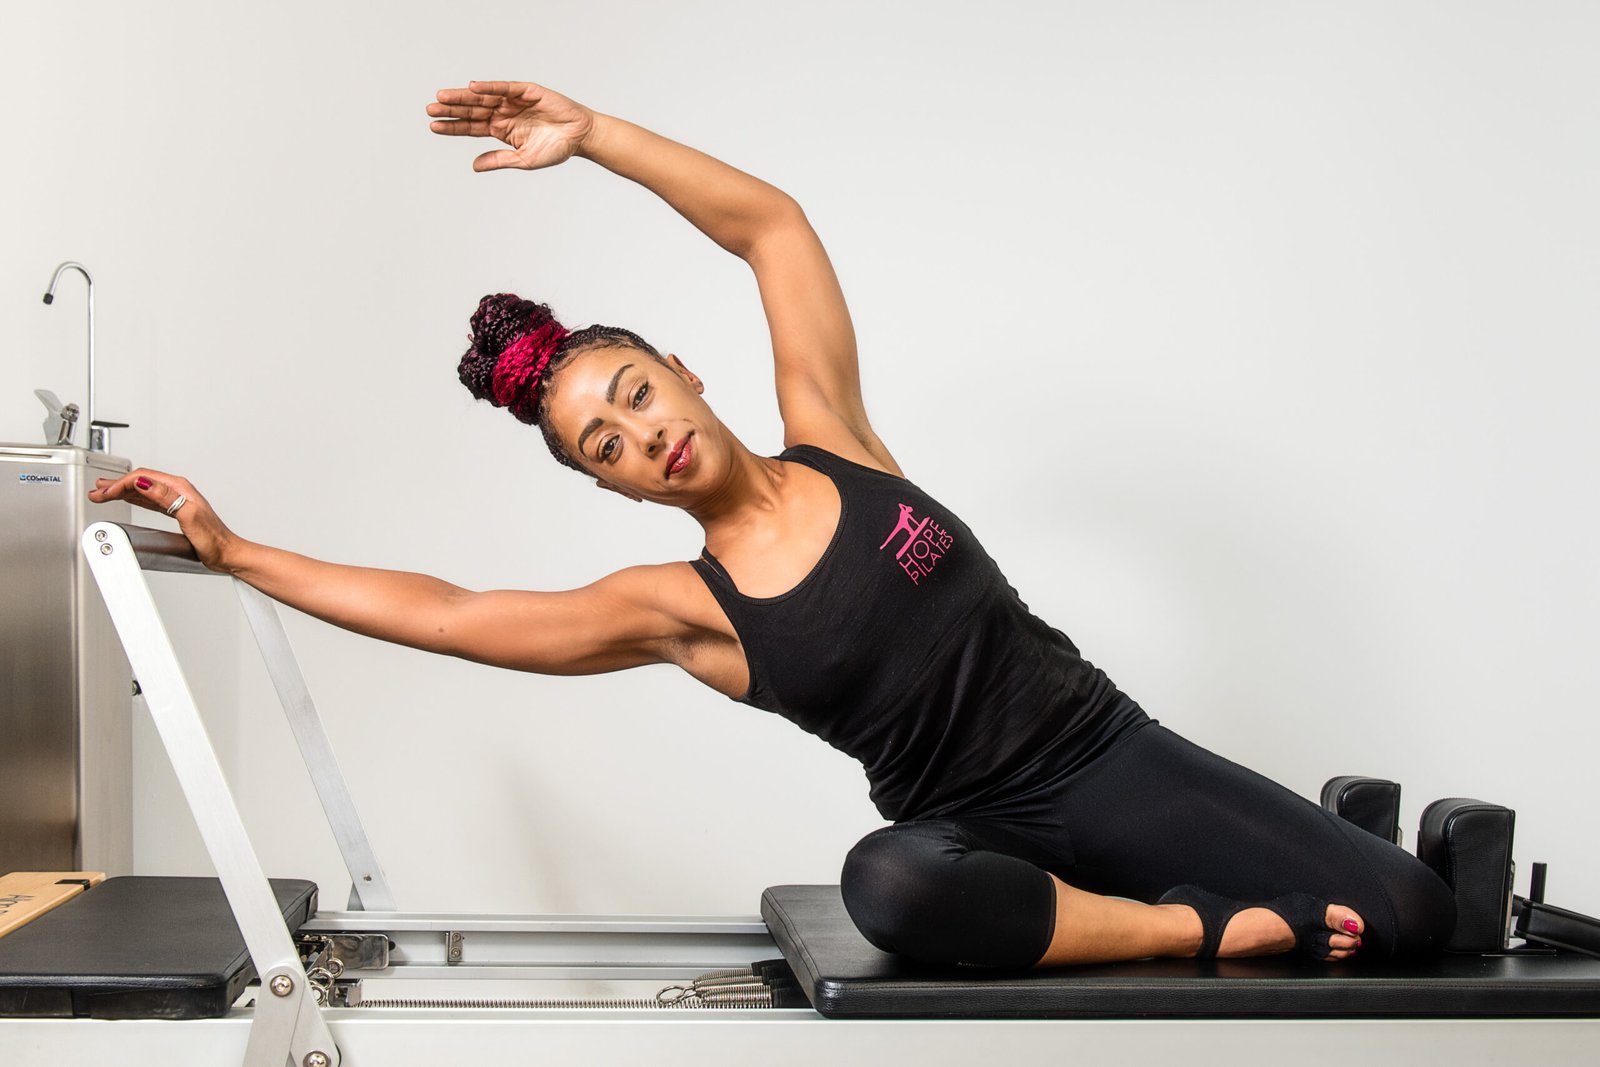 Business branding photography for busy pilates studio